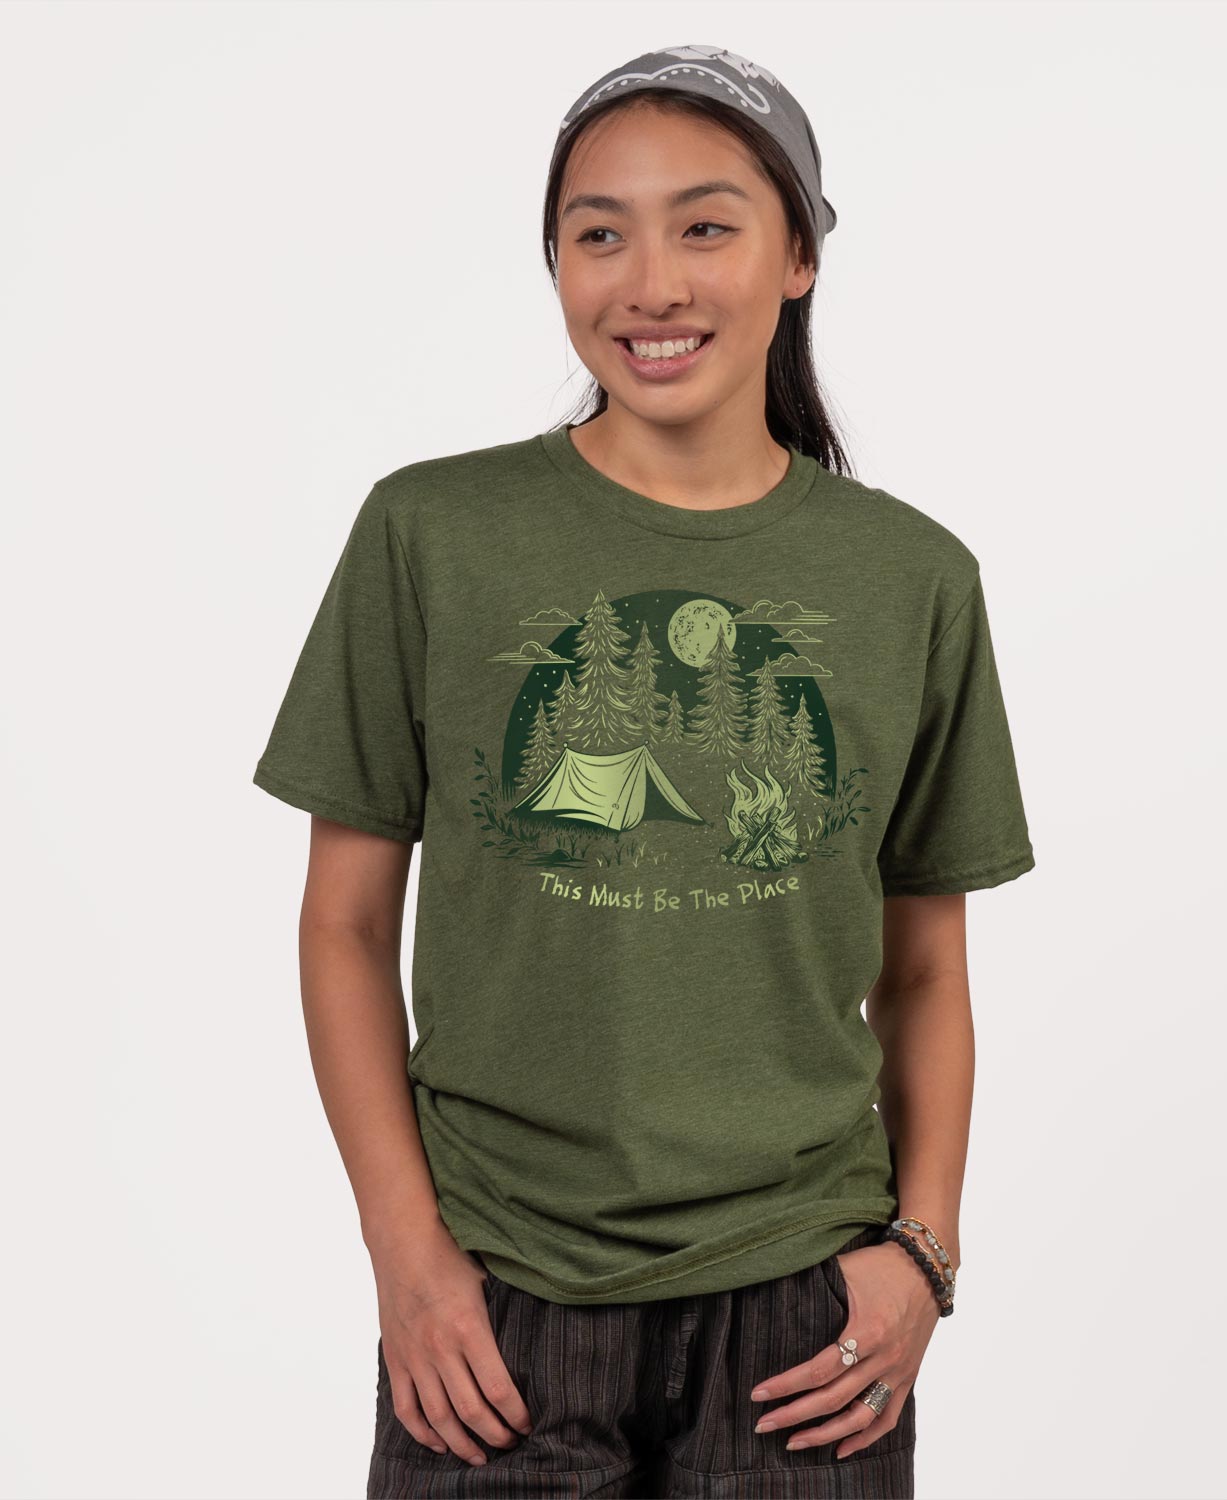 This Must Be The Place Recycled T-Shirt - Unisex